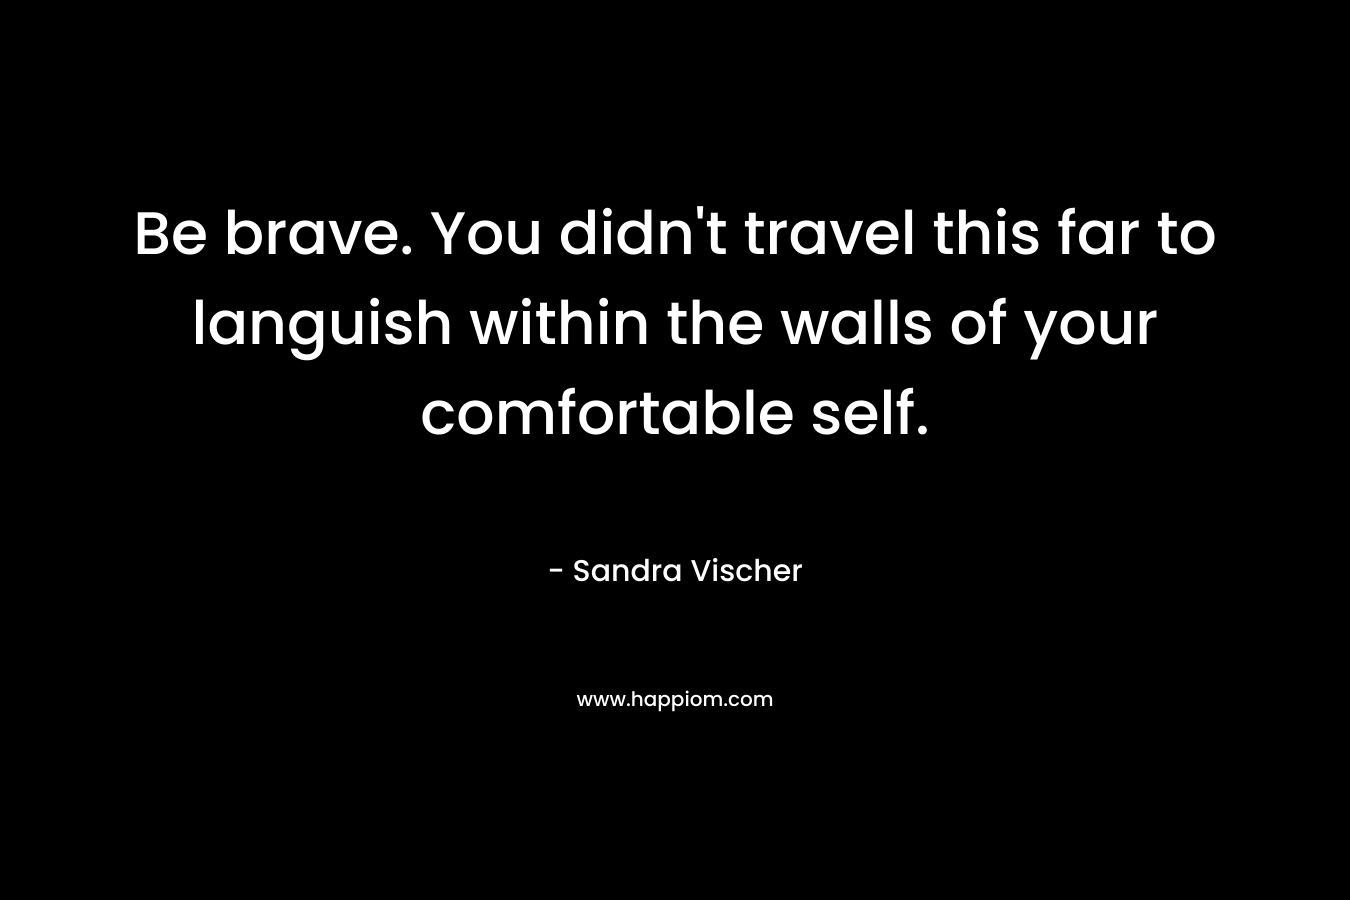 Be brave. You didn't travel this far to languish within the walls of your comfortable self.